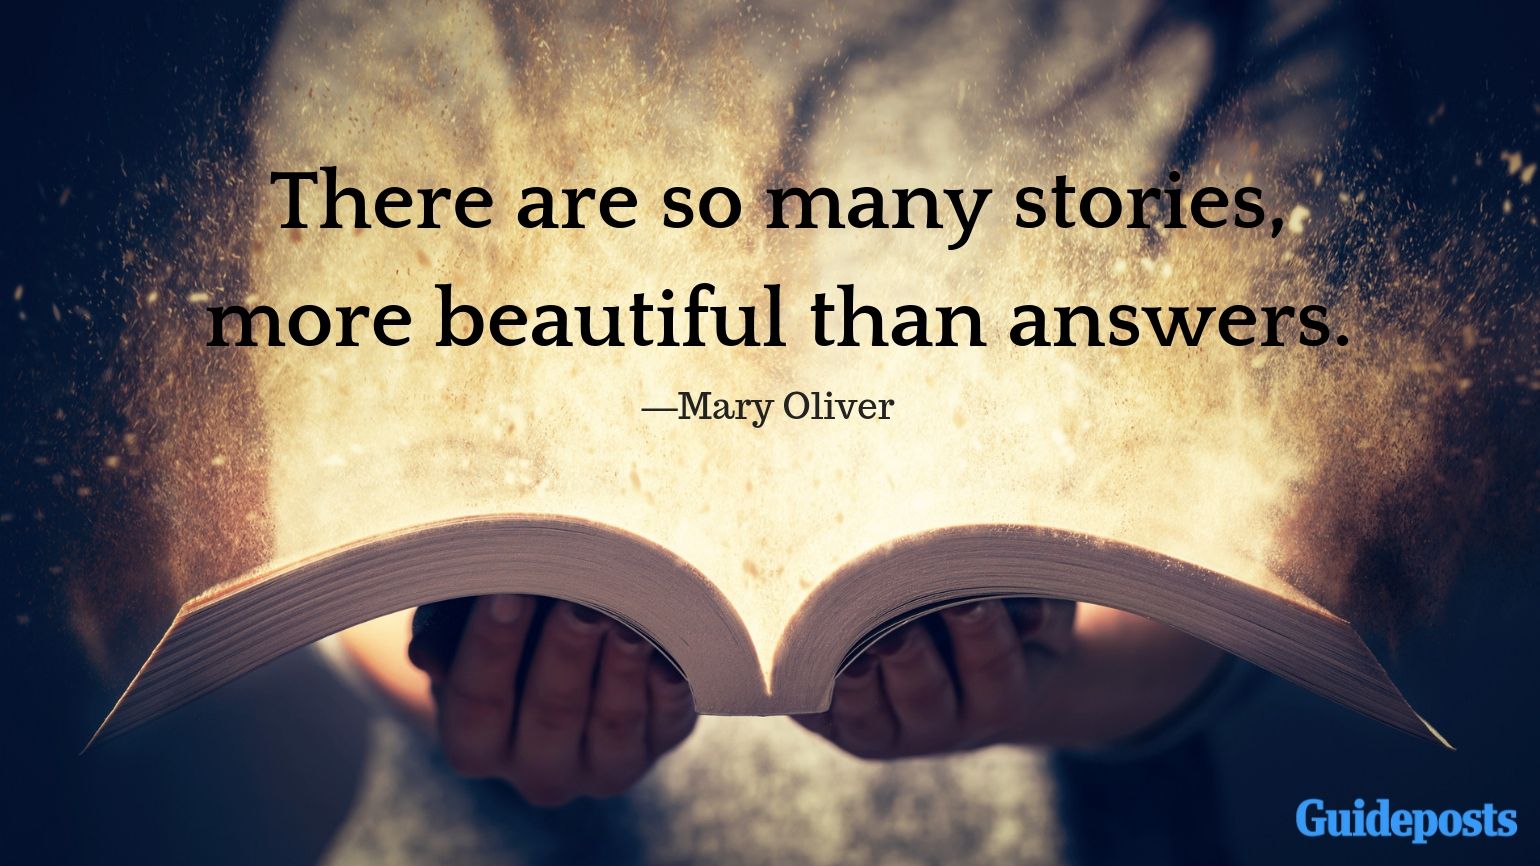 There are so many stories, more beautiful than answers.